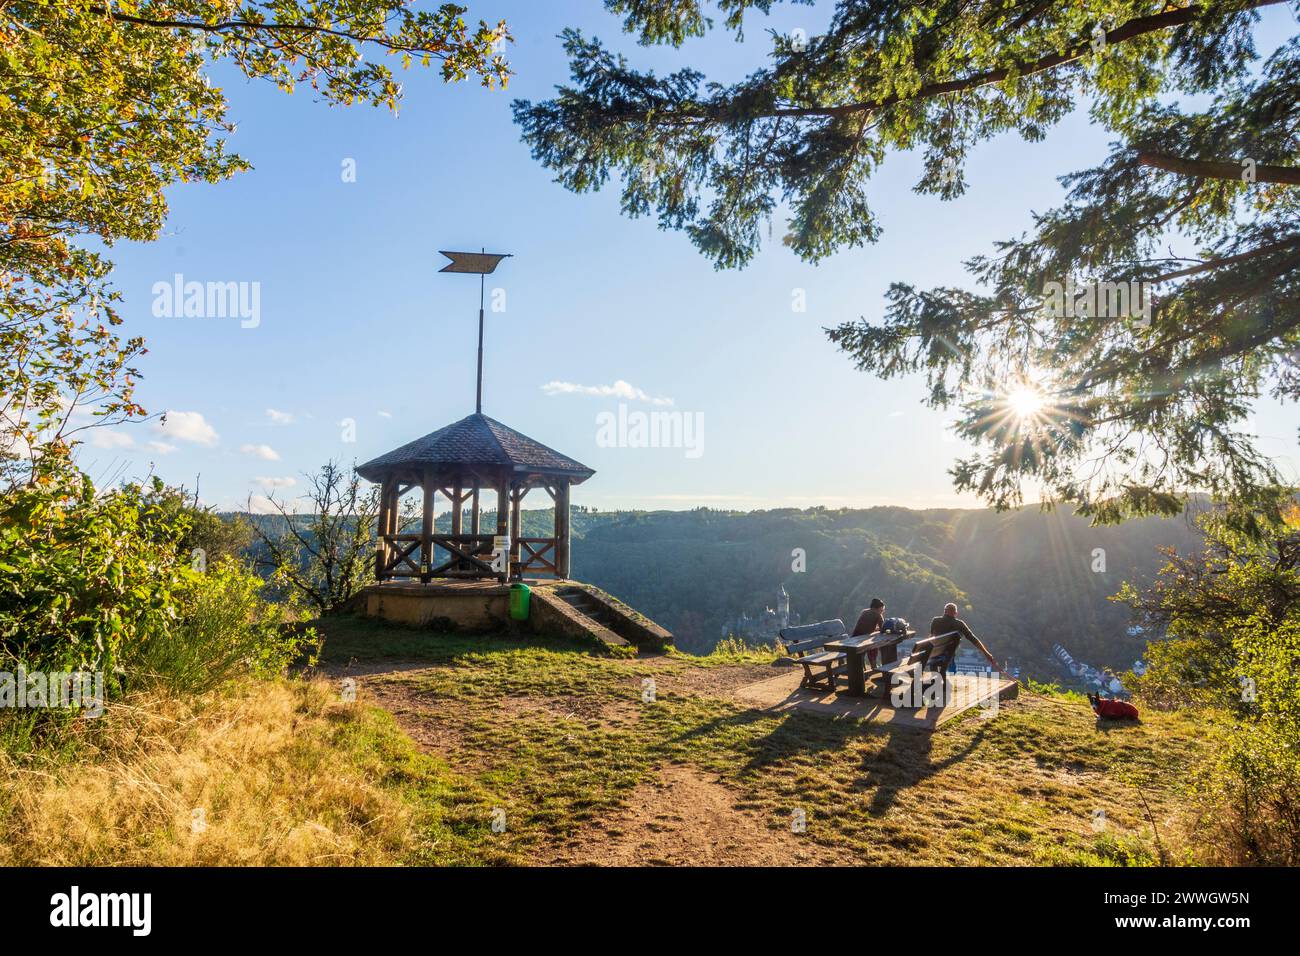 Cochem: viewpoint Wetterfahne, bench with people and dog in Mosel, Rheinland-Pfalz, Rhineland-Palatinate, Germany Stock Photo